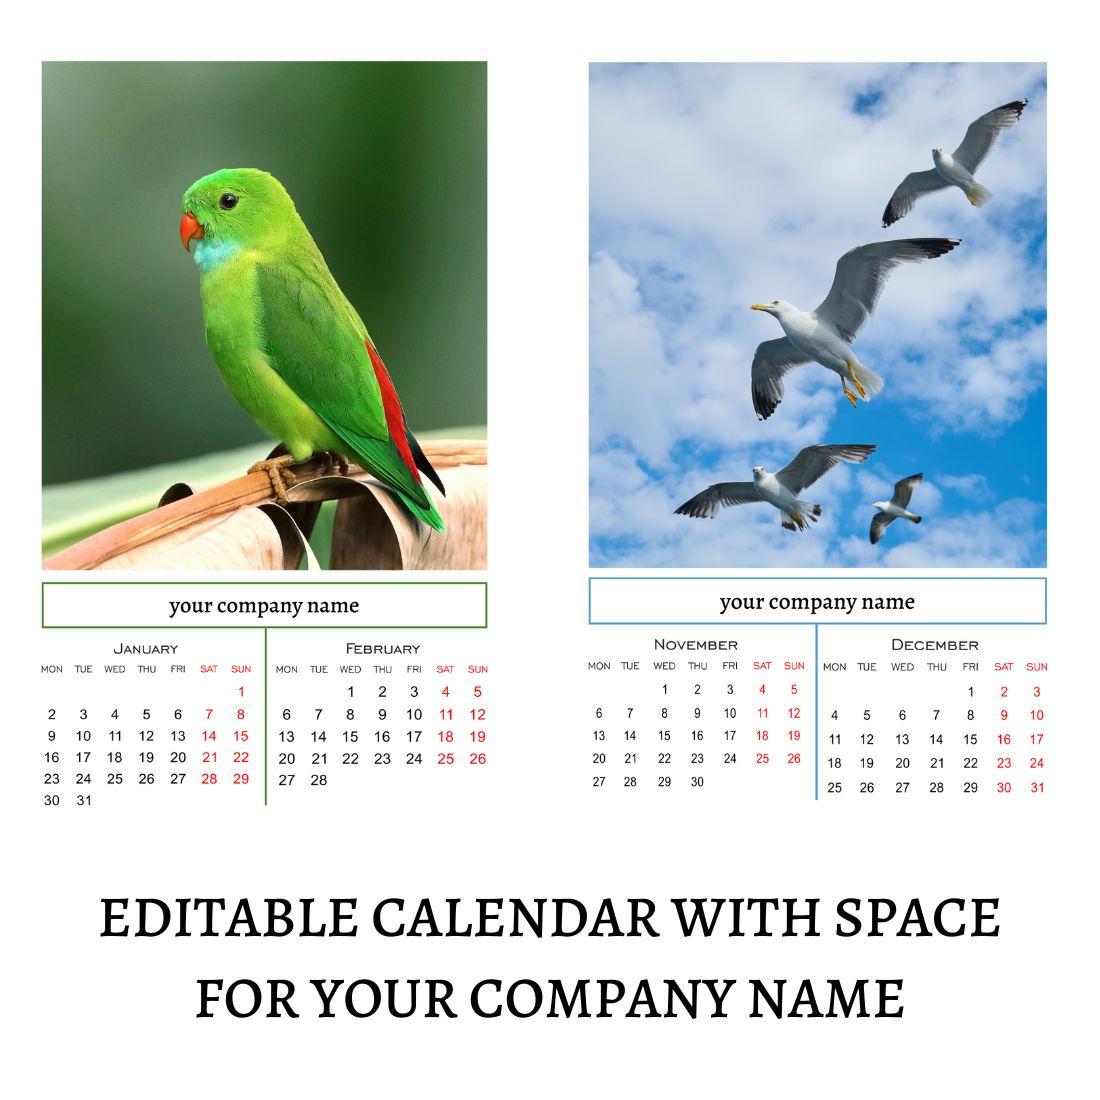 Editable calendar with space for your company name.